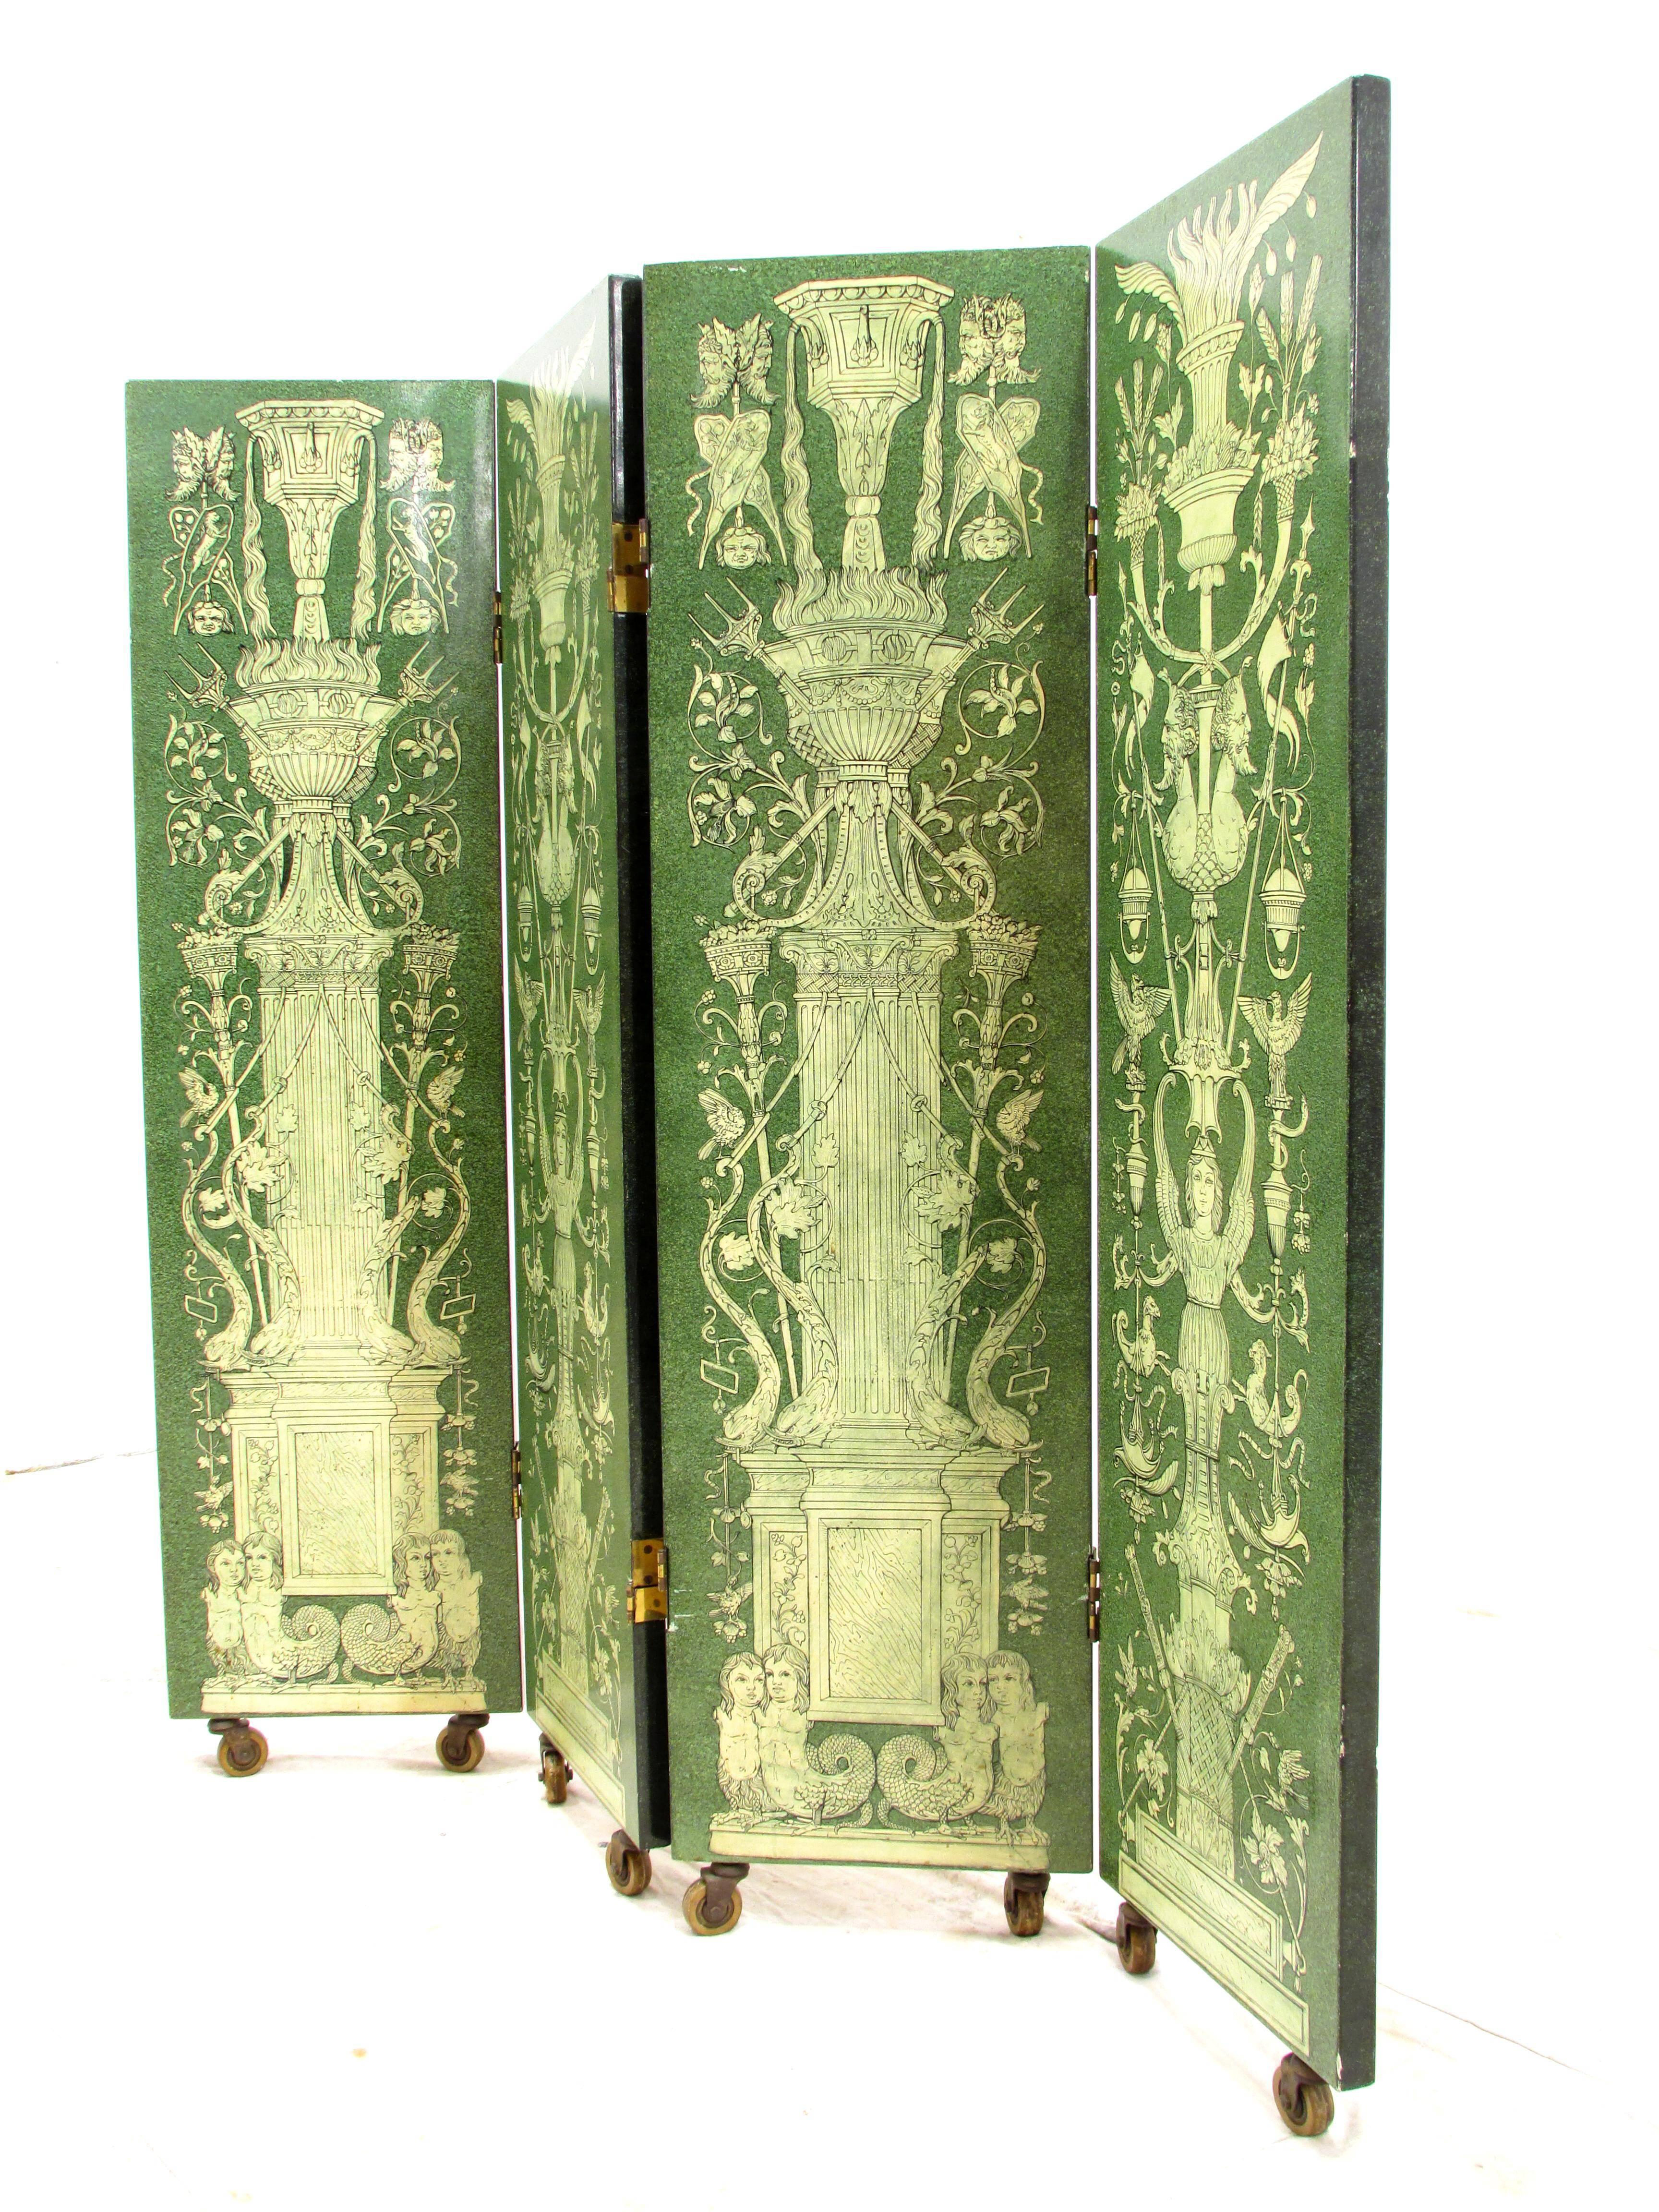 Rare early four panel folding screen by Piero Fornasetti green in color with classical motif has original white rubber wheels and a 